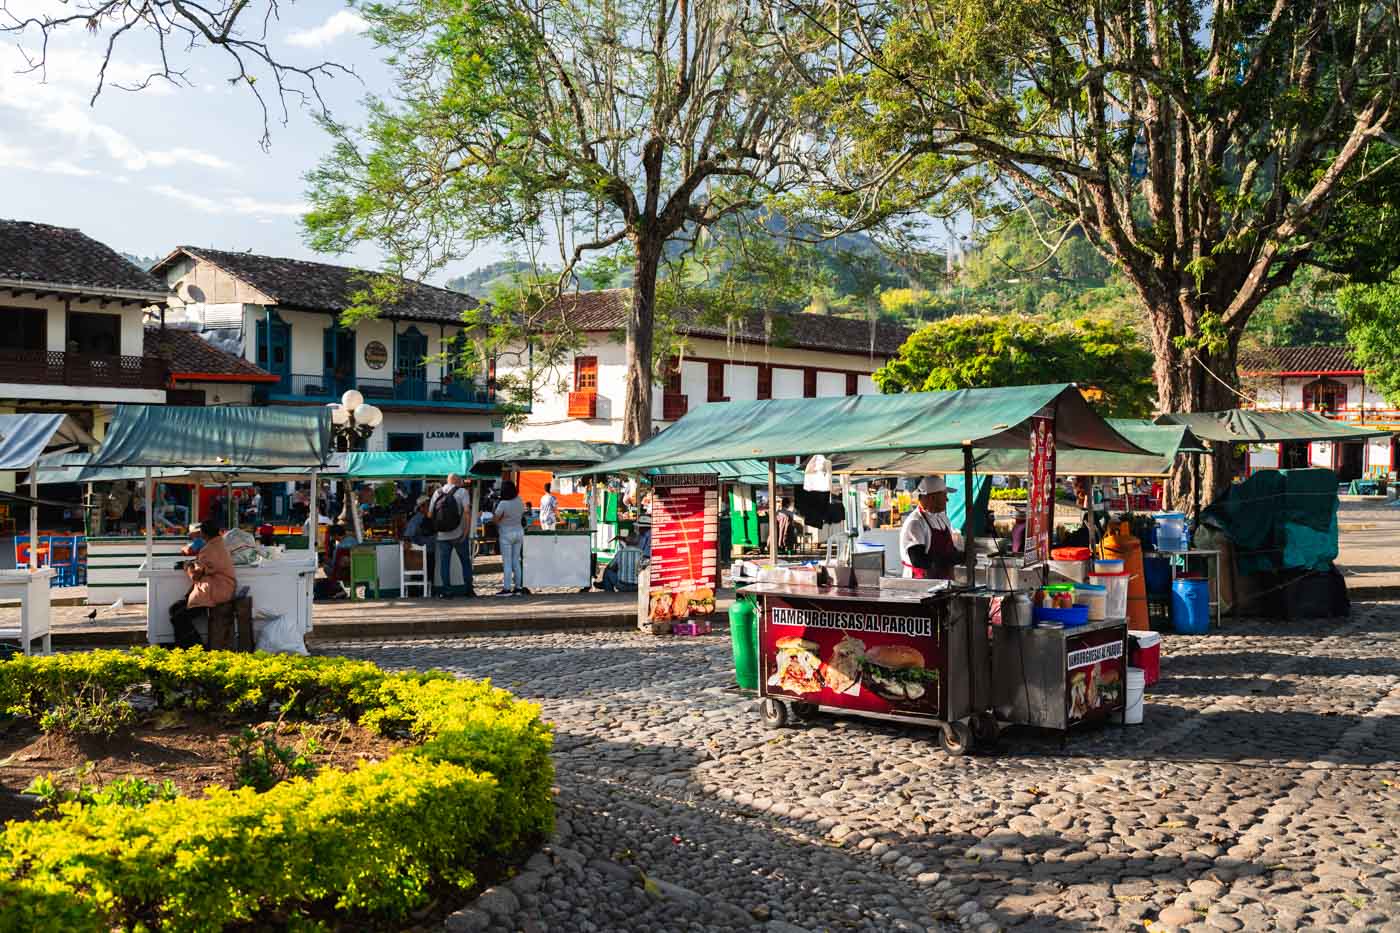 Different food stall on Plaza de Libertador in Jardin, Colombia.